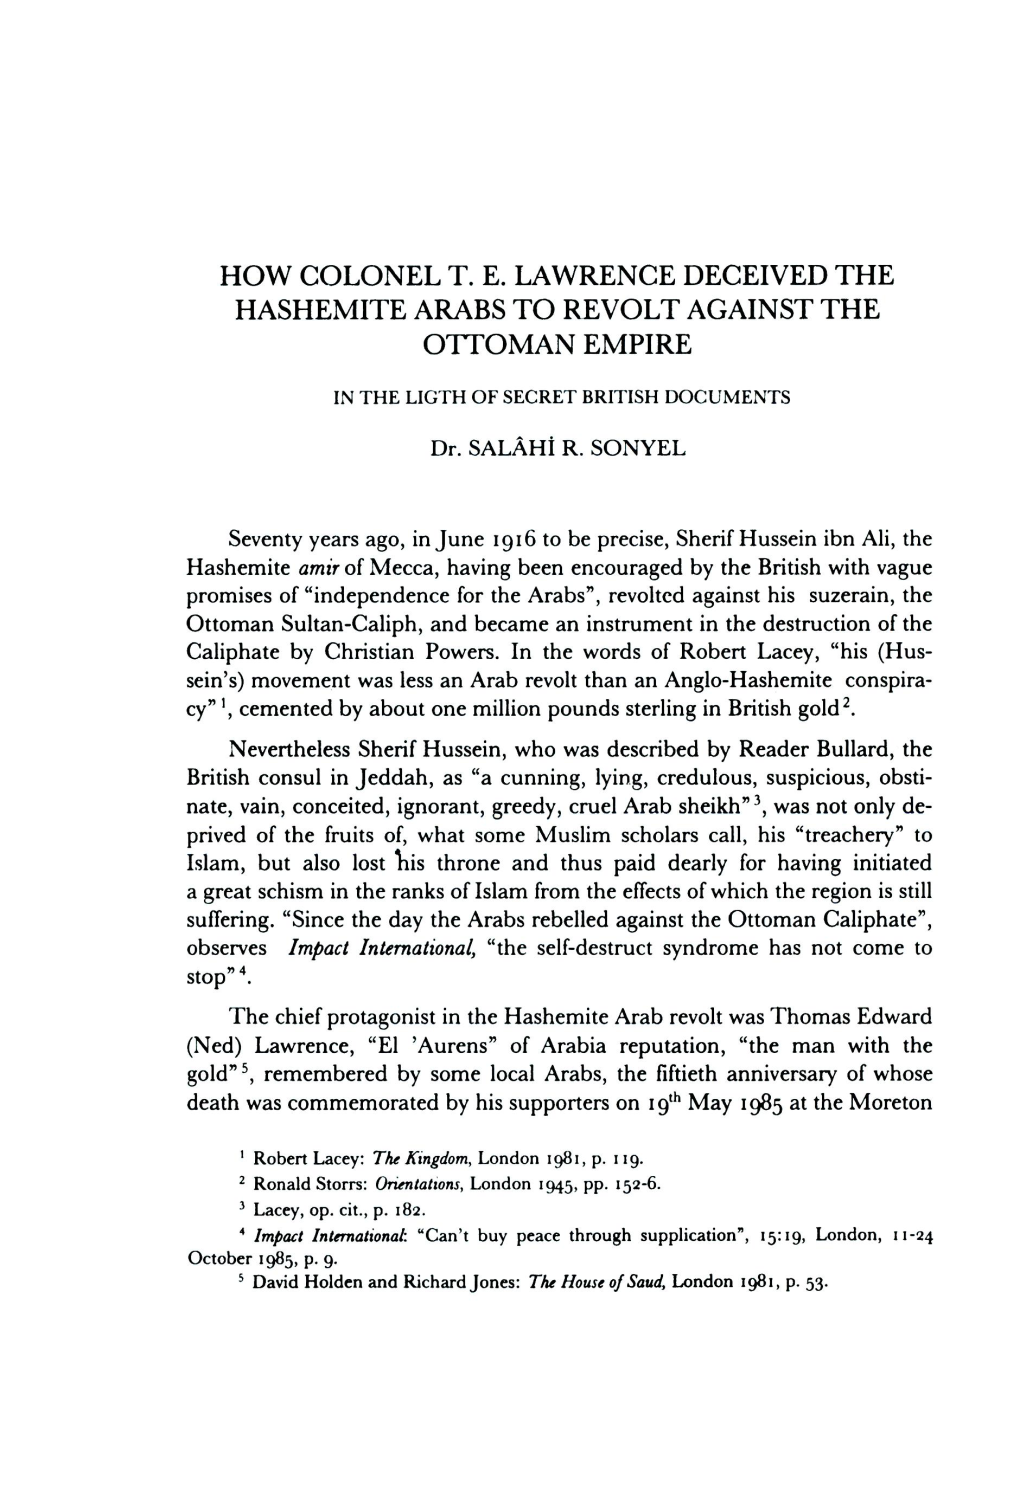 How Colonel T. E. Lawrence Deceived the Hashemite Arabs to Revolt Against the Ottoman Empire